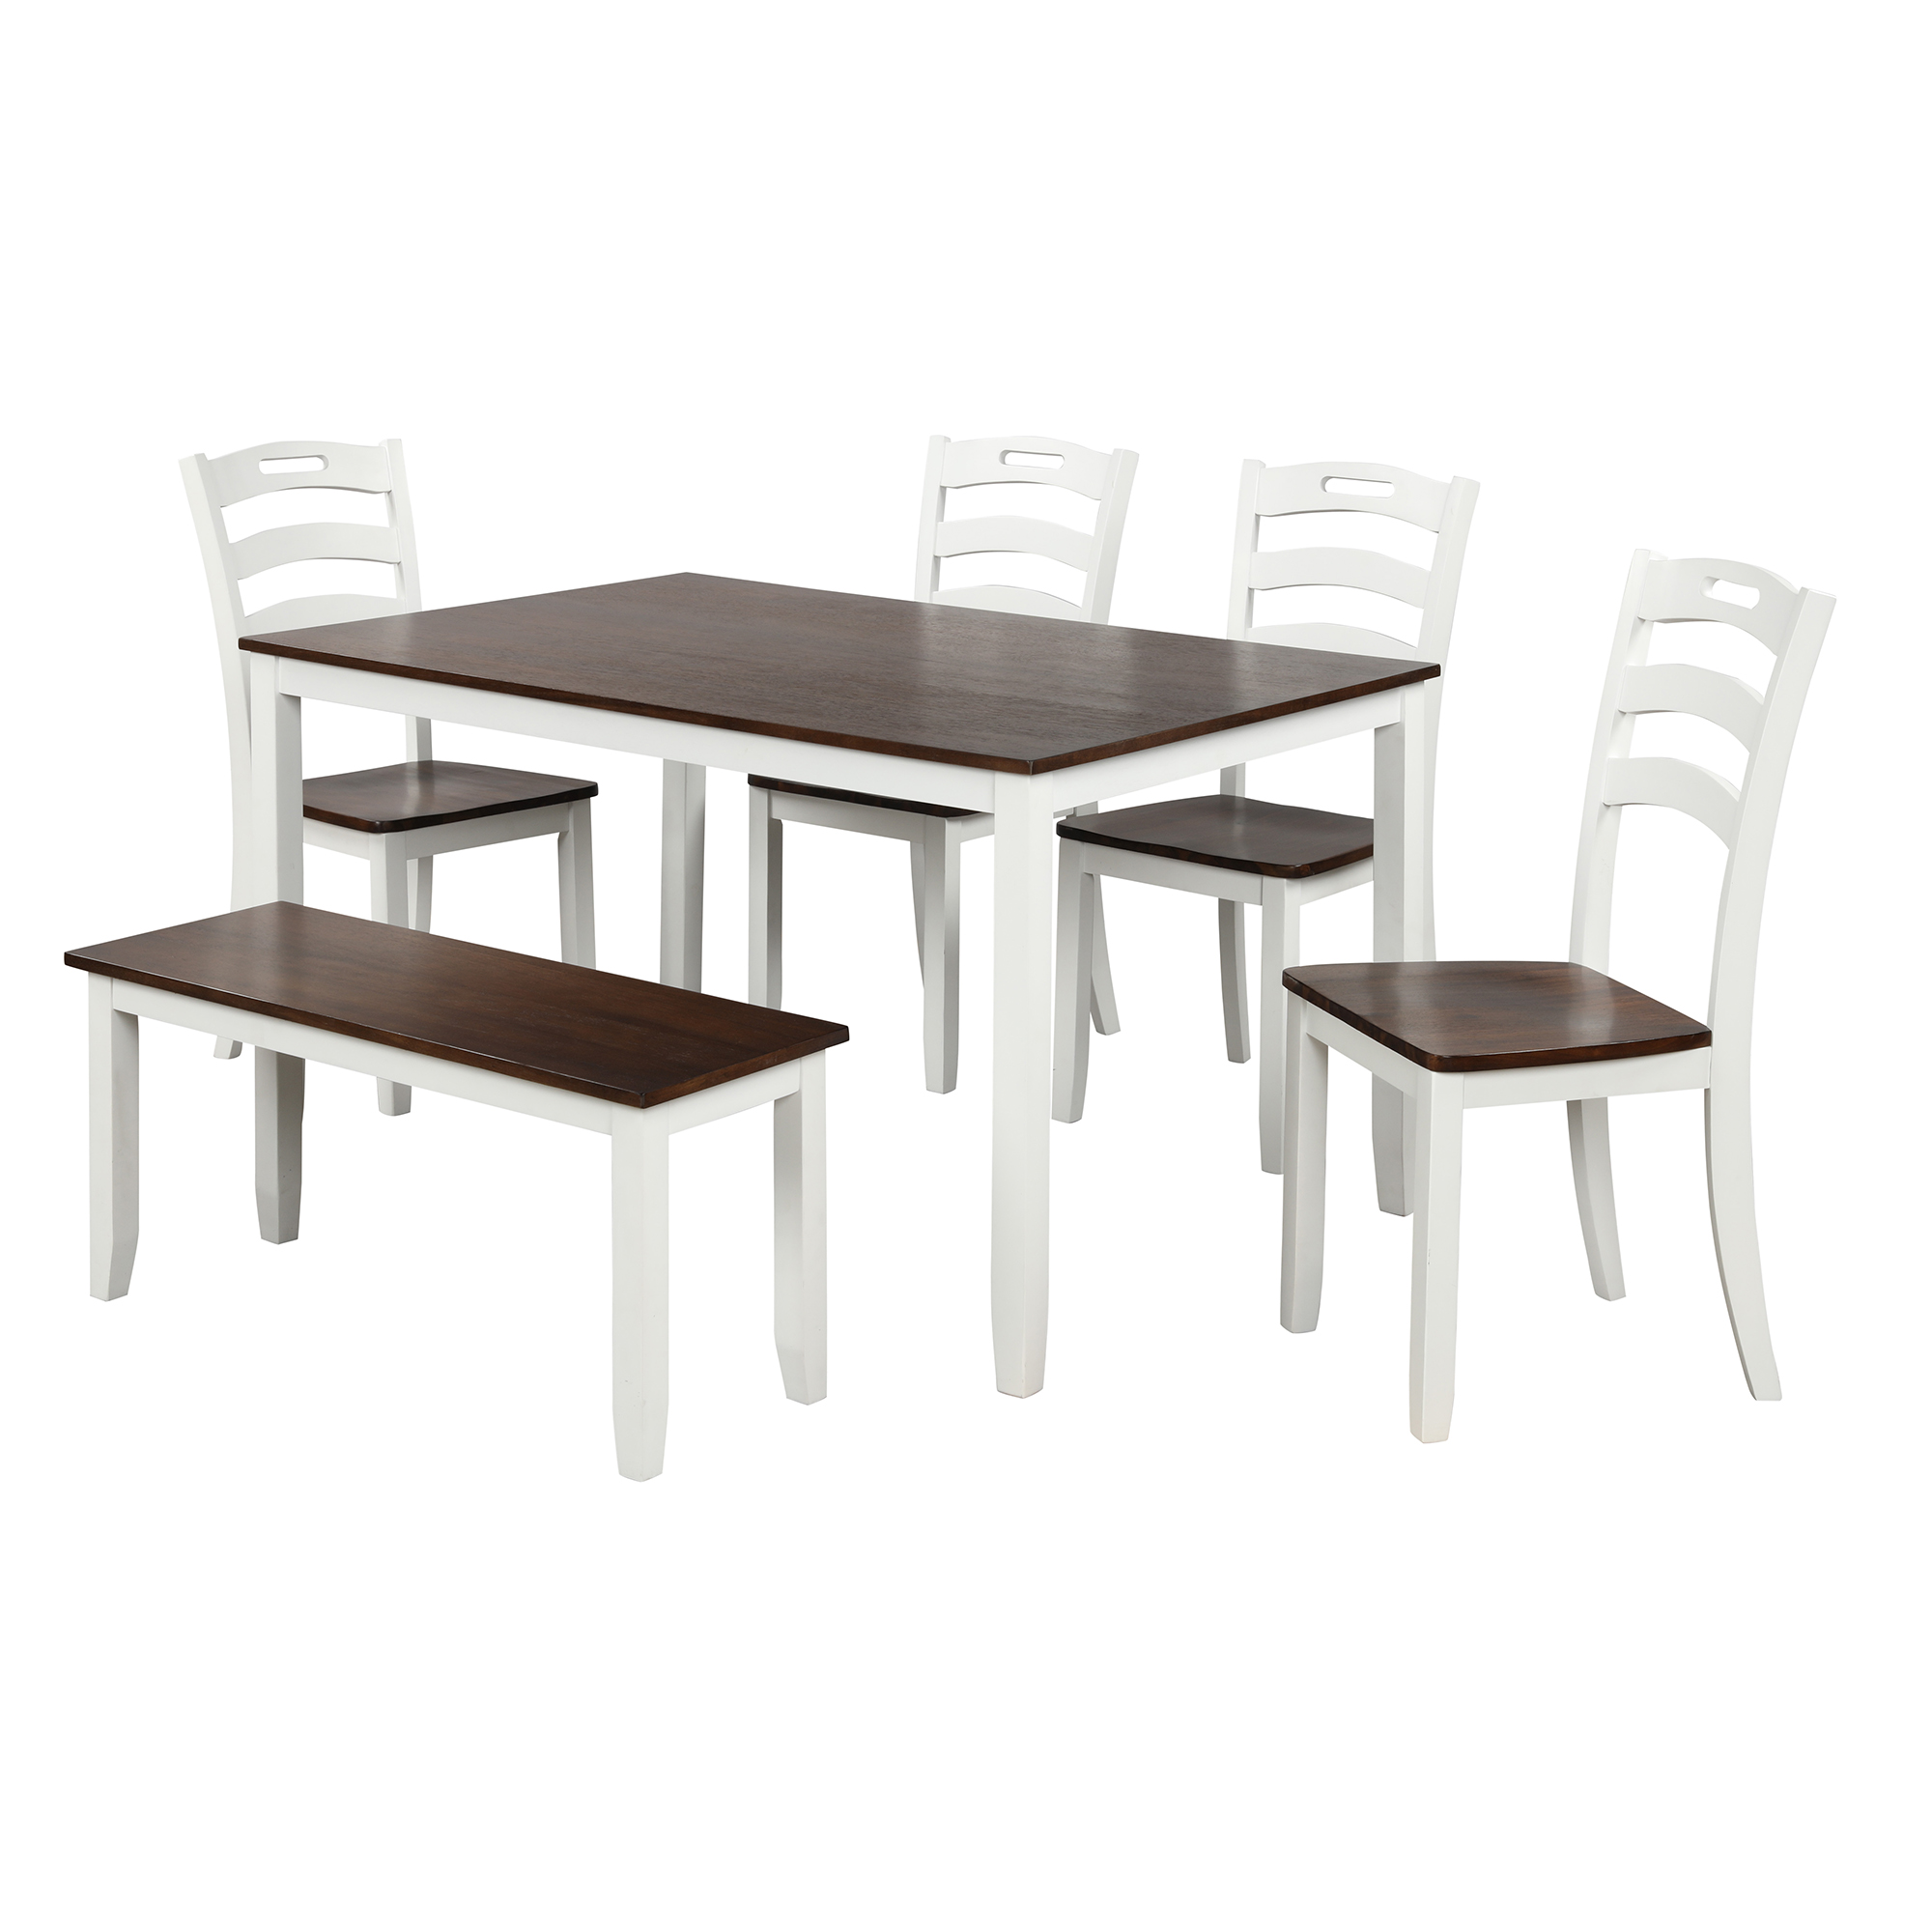 6 Piece Dining Table Set with Bench, Table Set with Waterproof Coat, Ivory and Cherry-CASAINC